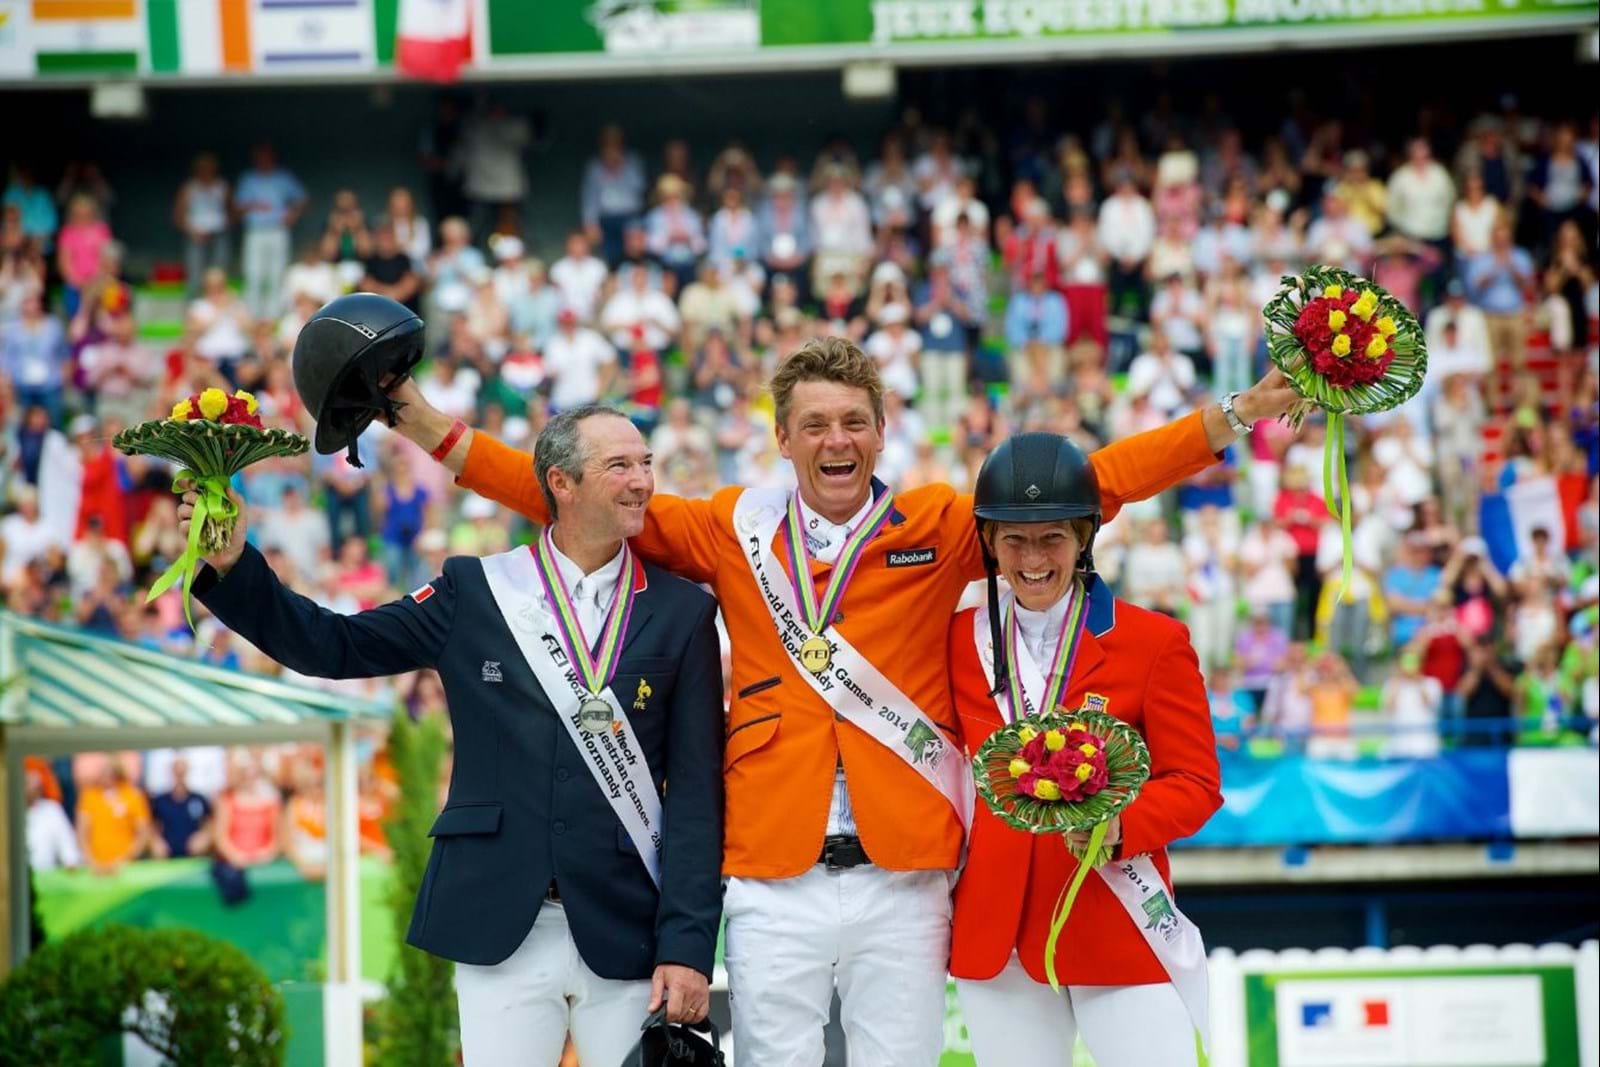 SUNSET+VINE TO BE HOST BROADCASTER FOR THE FEI WORLD EQUESTRIAN GAMES™ TRYON 2018